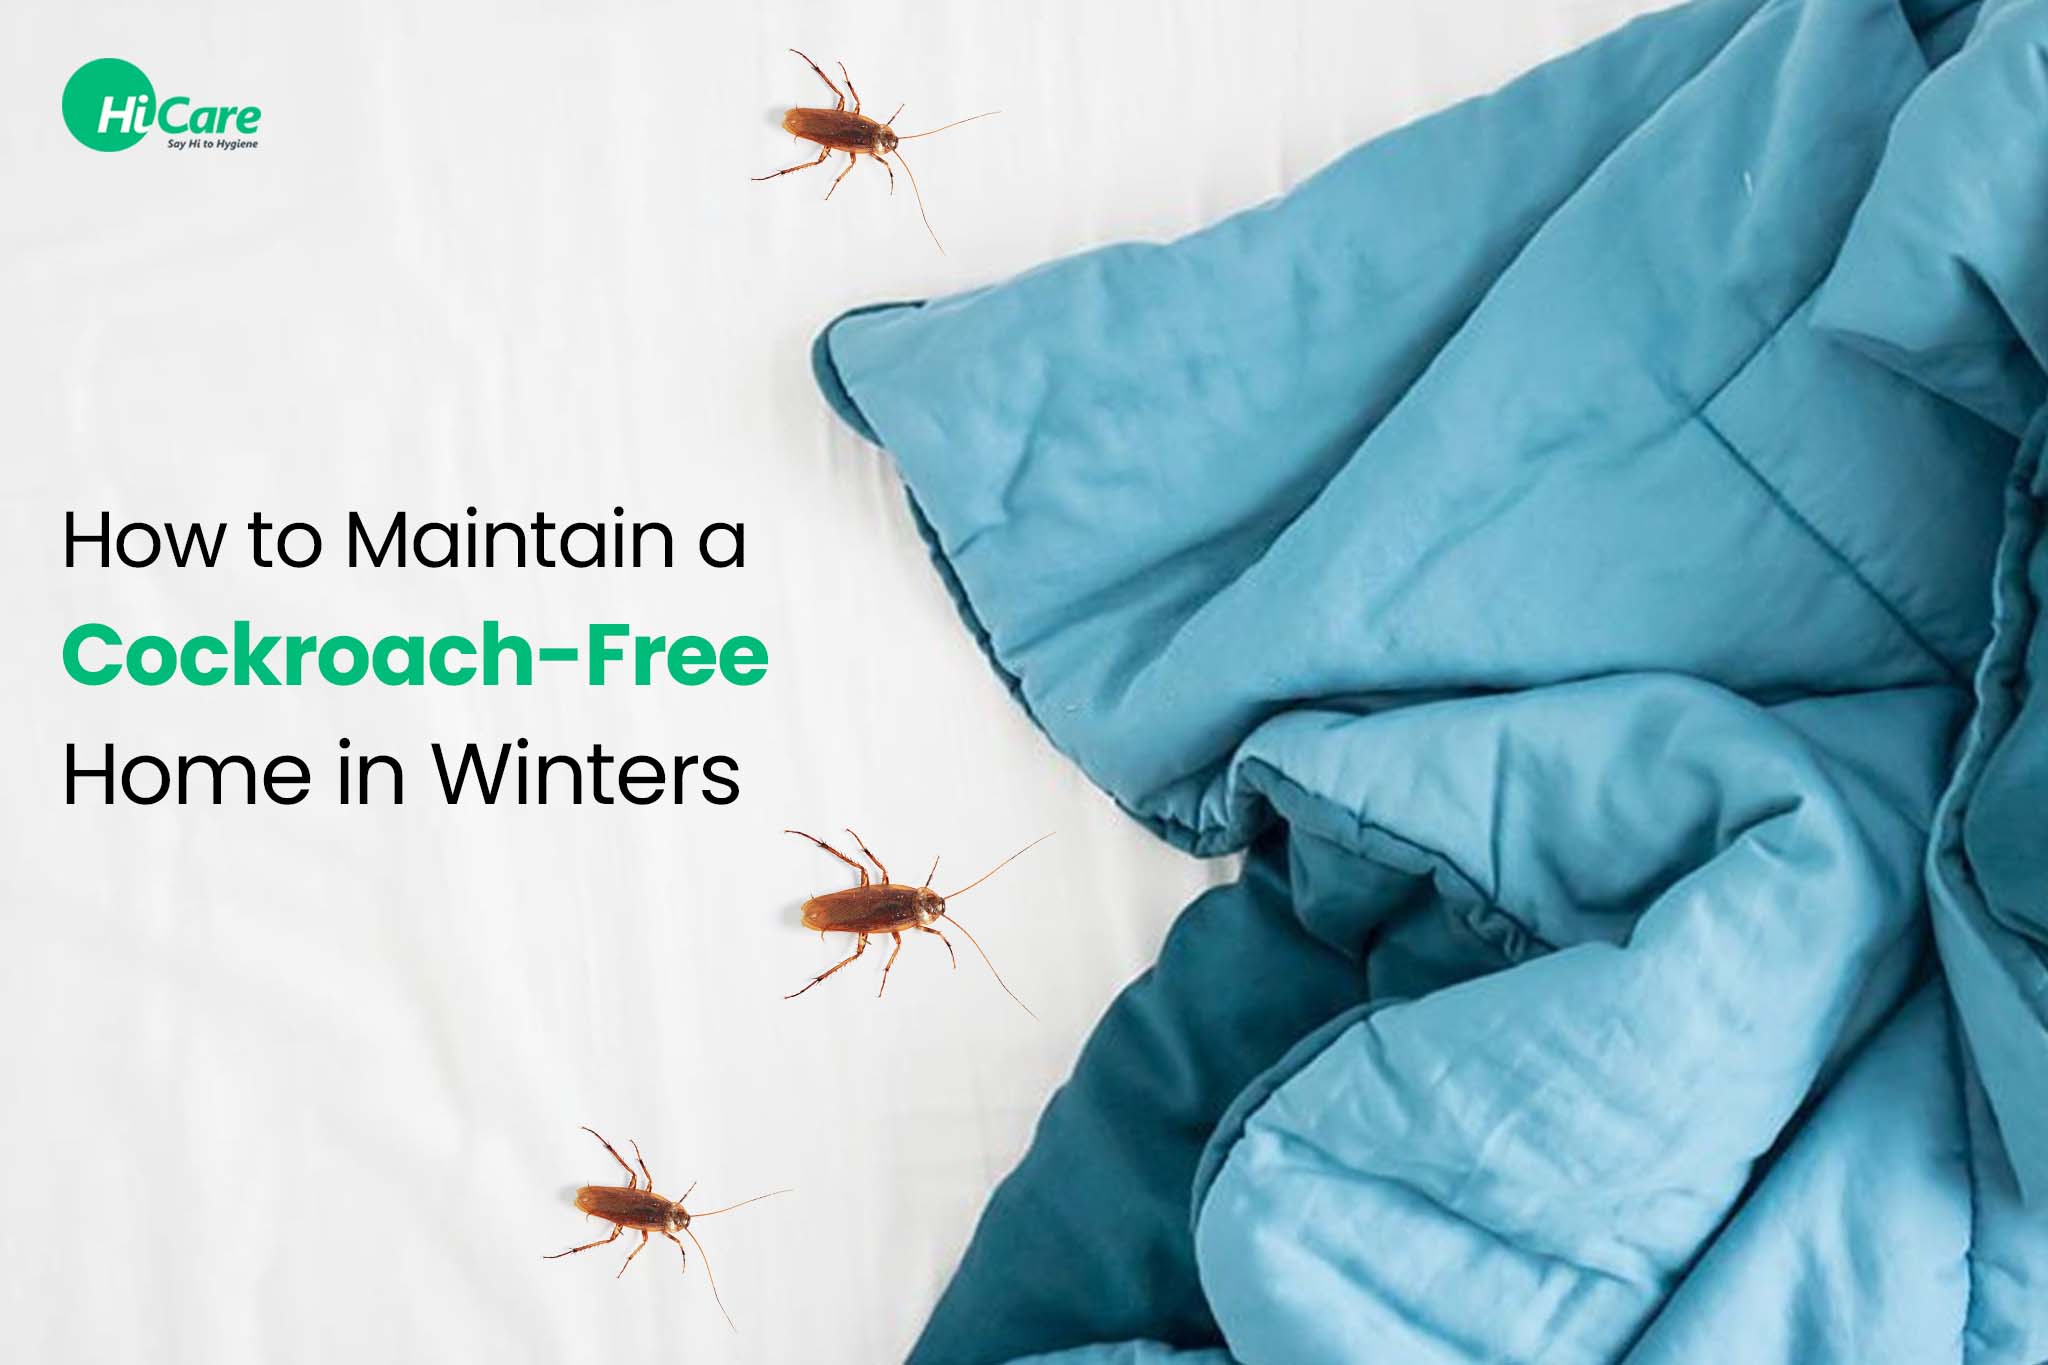 How to Maintain a Cockroach-Free Home in Winters?